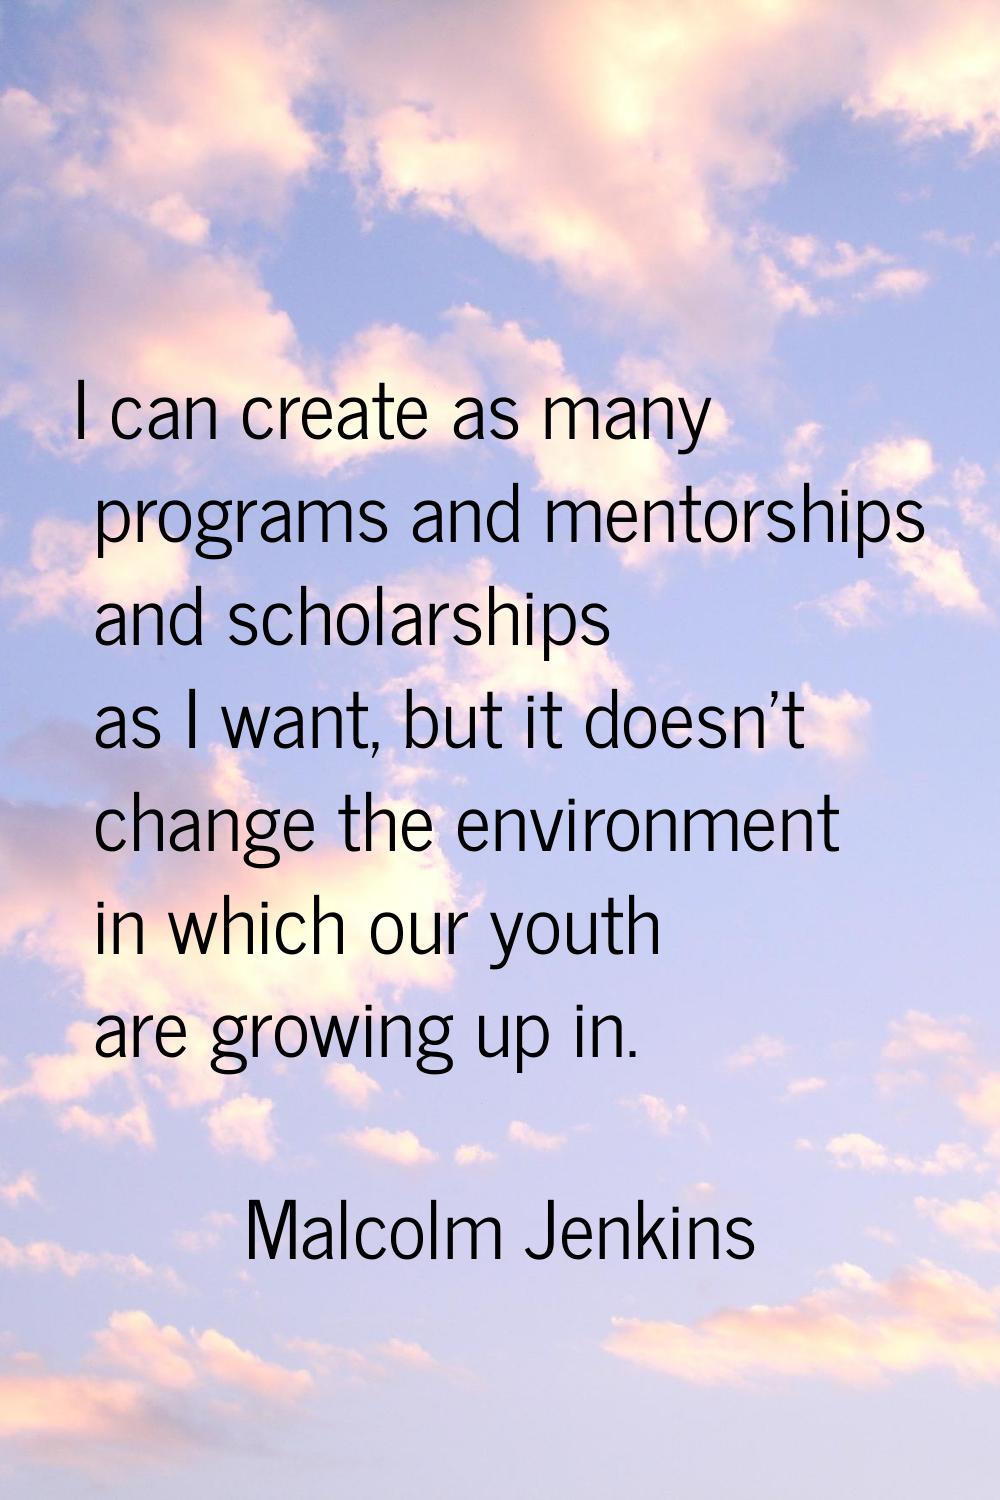 I can create as many programs and mentorships and scholarships as I want, but it doesn't change the